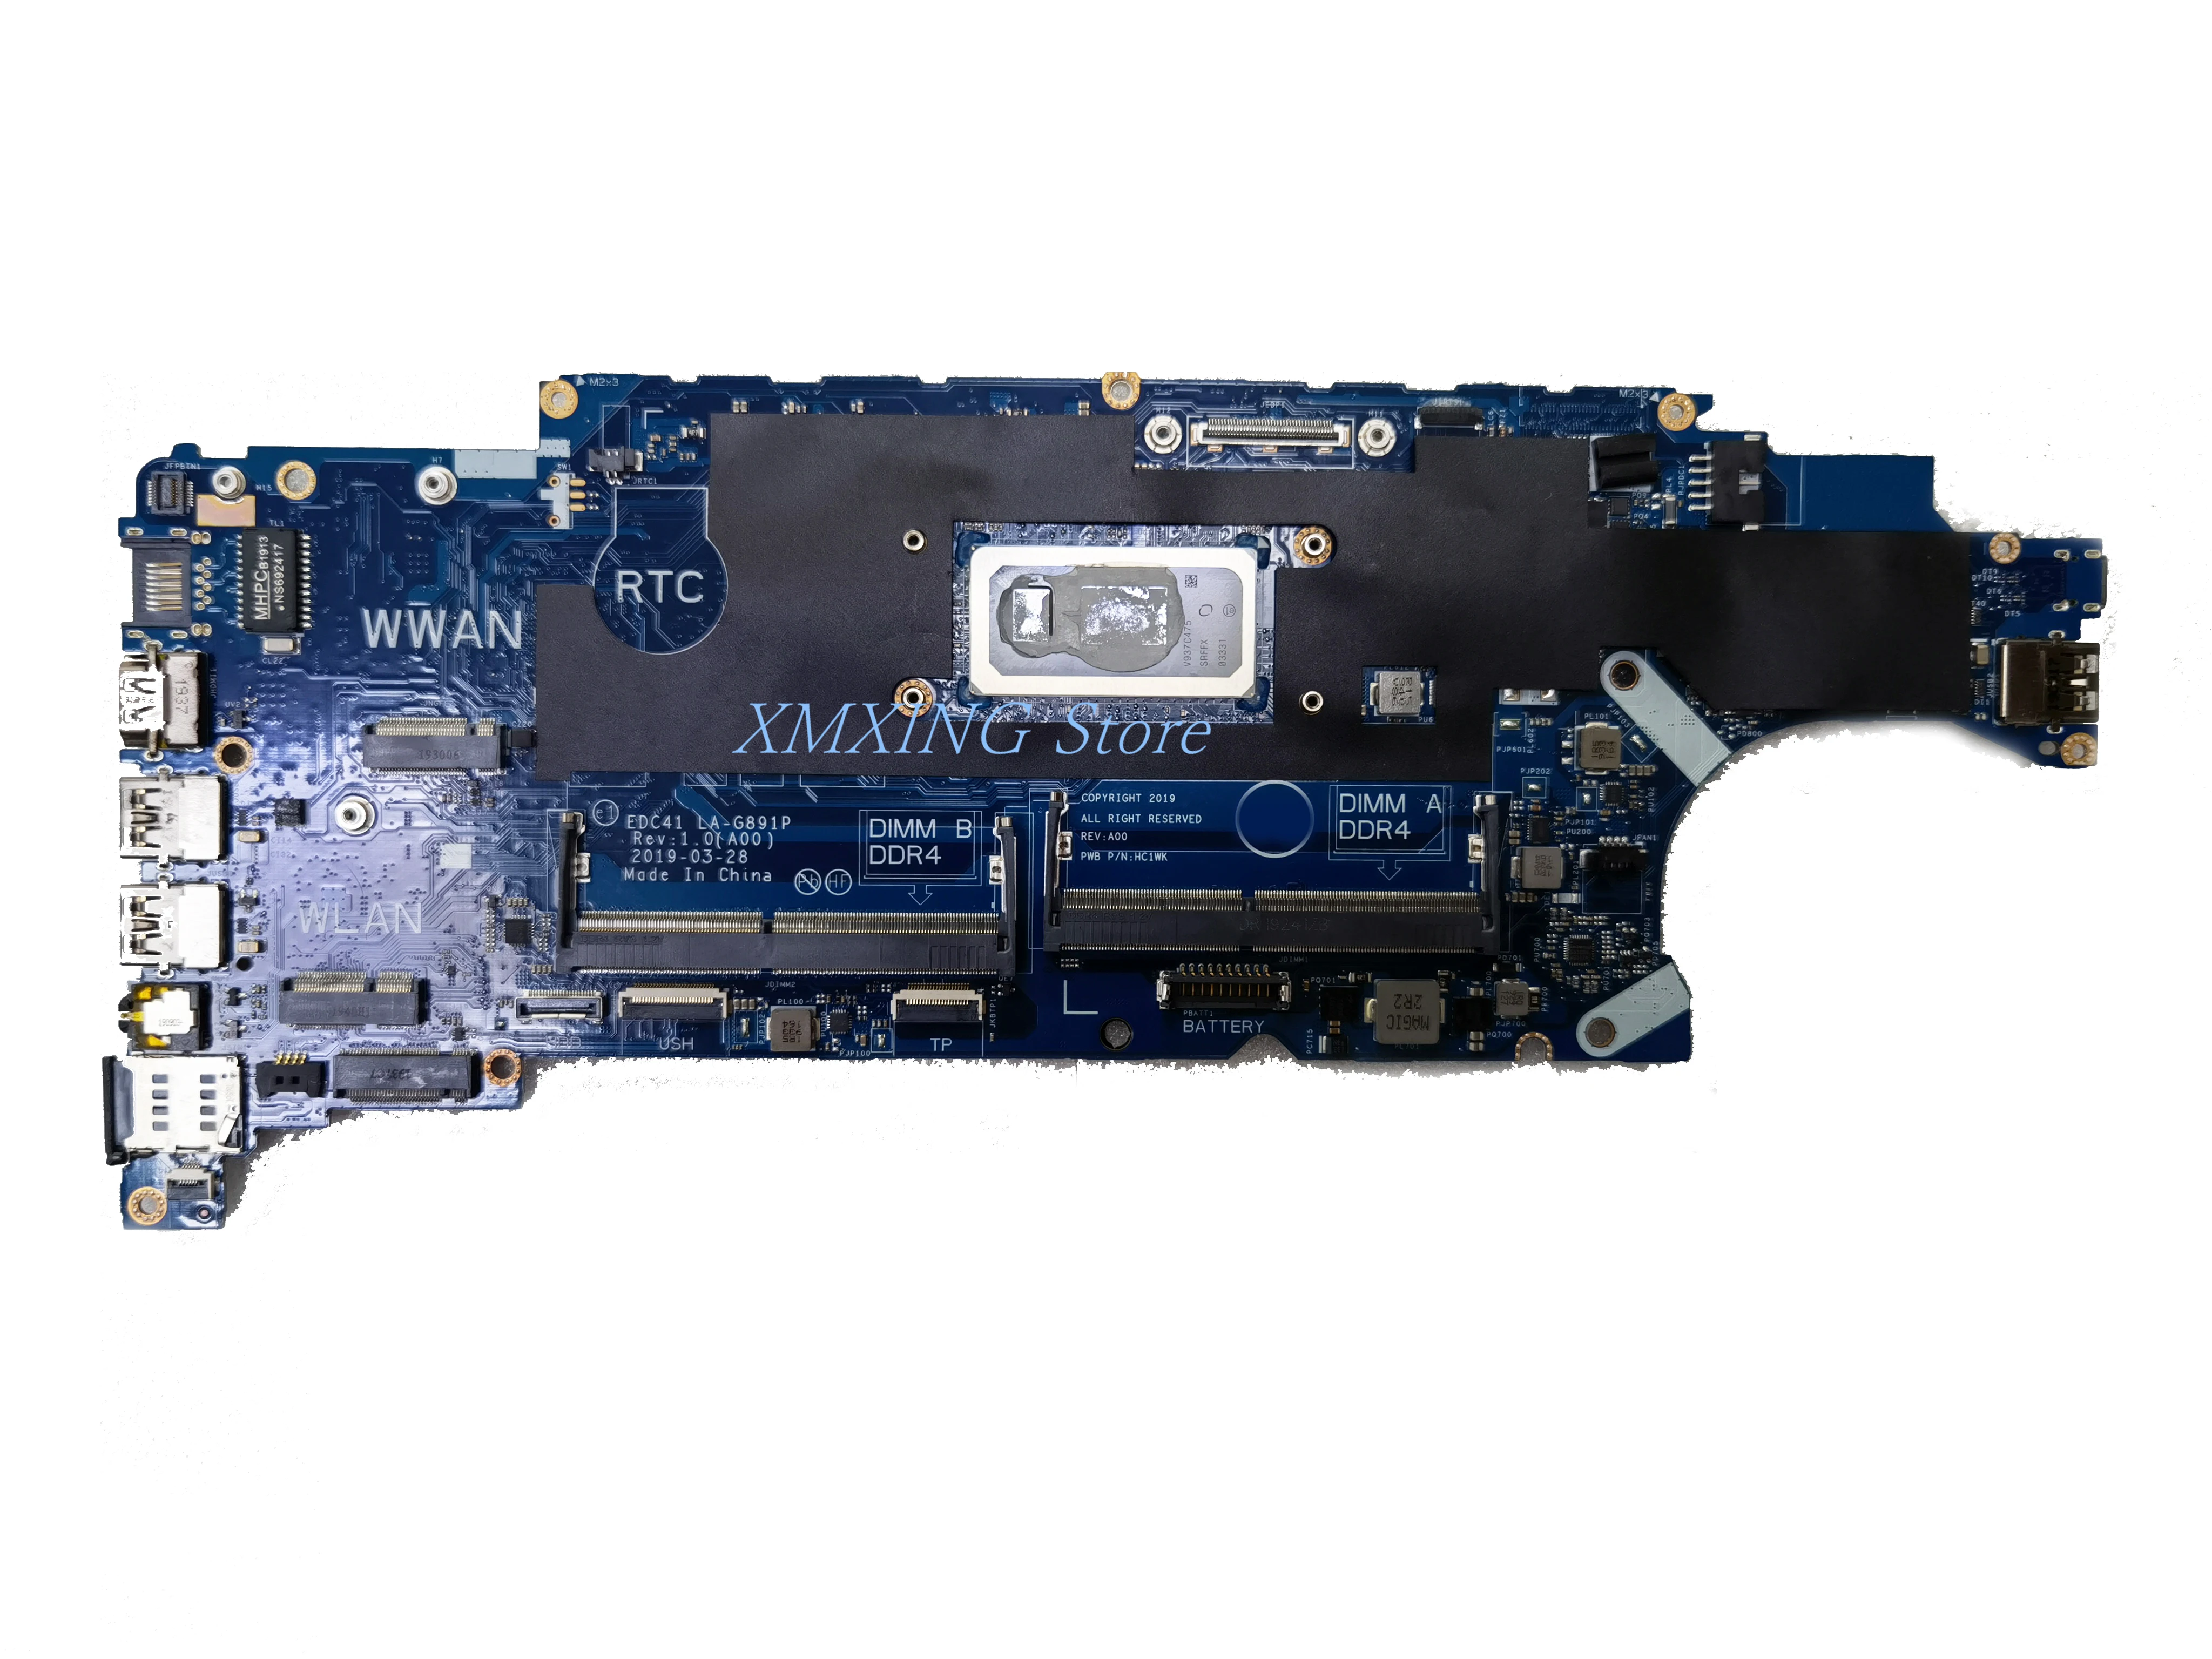 

FULCOL For DELL Latitude 5400 Laptop Motherboard LA-G891P CPU I5-8265U CN-03CY3R 03CY3R 3CY3R Tested 100% work